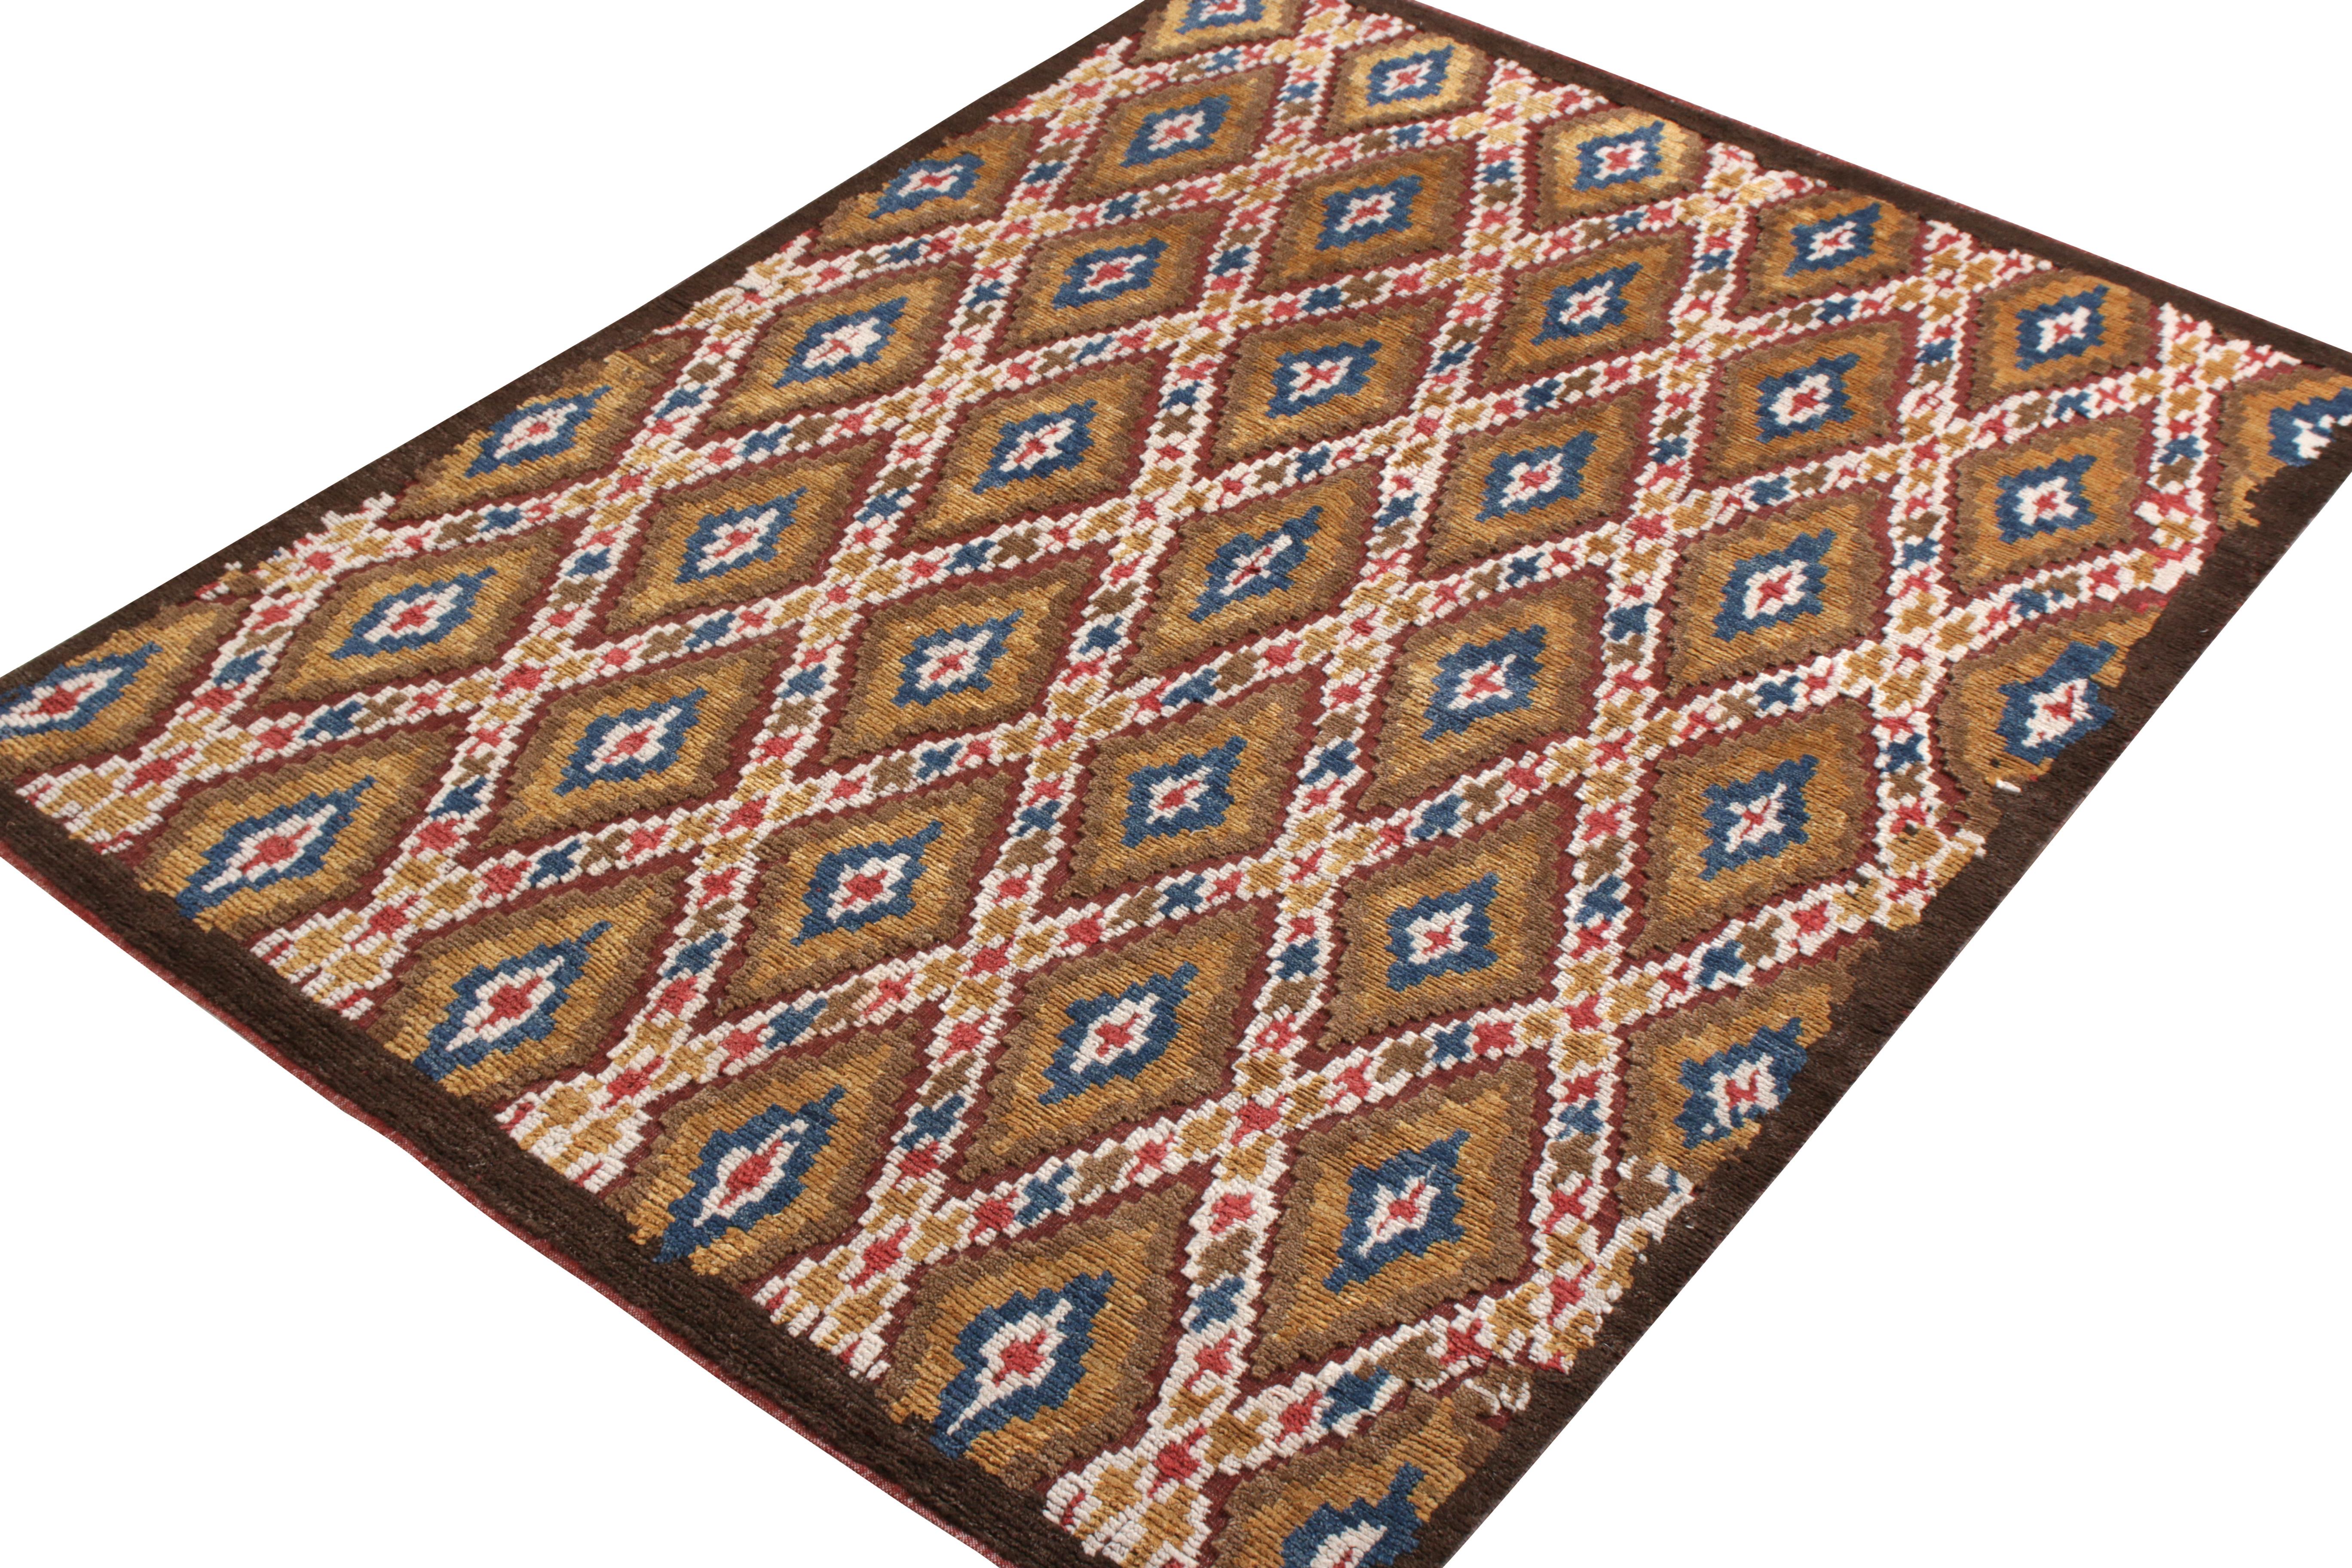 Tribal Rug & Kilim’s Moroccan Style Rug in Beige-Brown All over Diamond Pattern For Sale